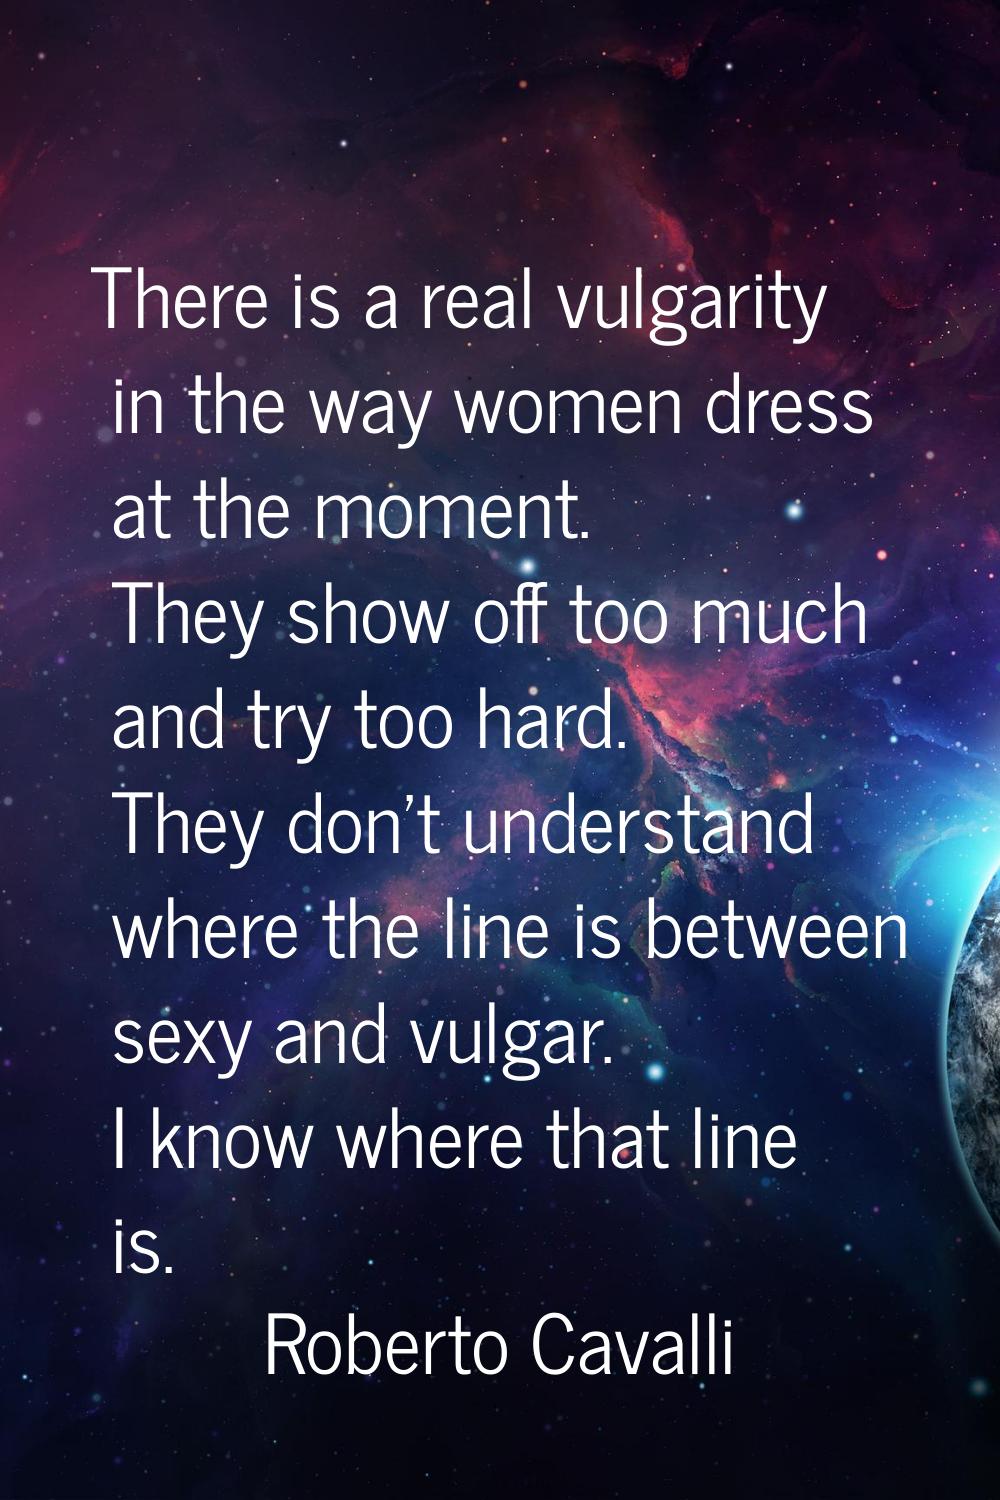 There is a real vulgarity in the way women dress at the moment. They show off too much and try too 